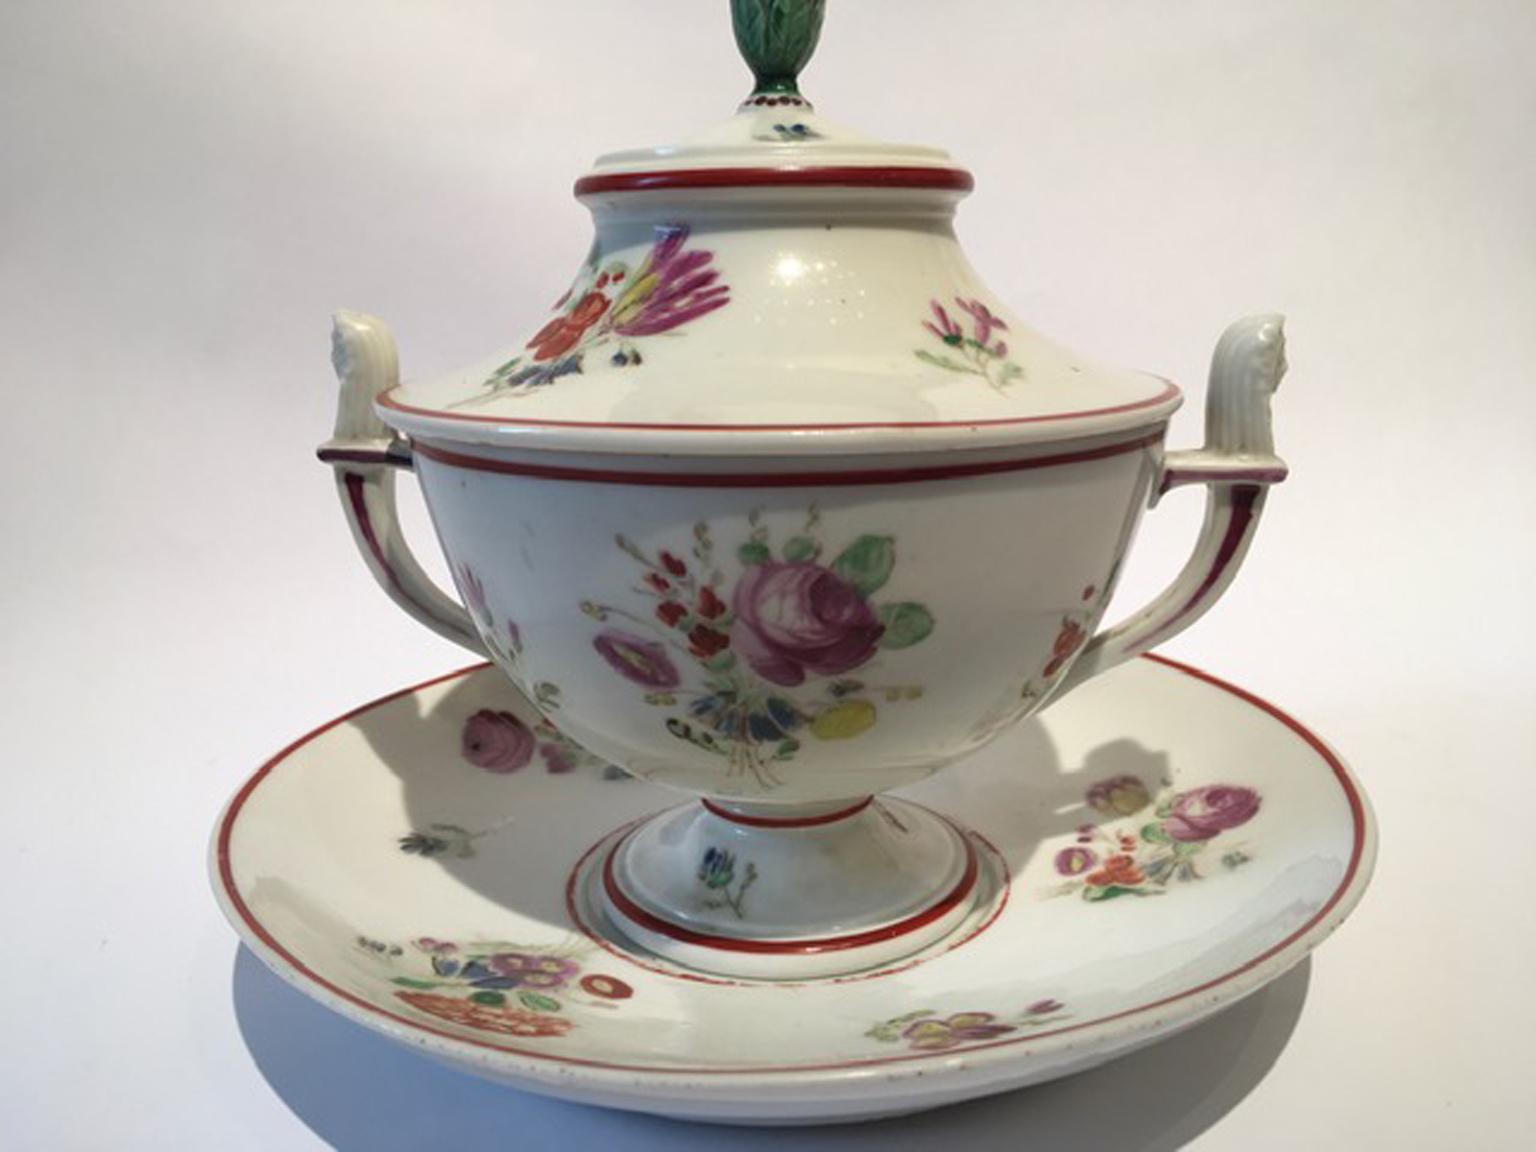 Italy 18th Century Richard Ginori Porcelain Sugar Bowl with Cover For Sale 9